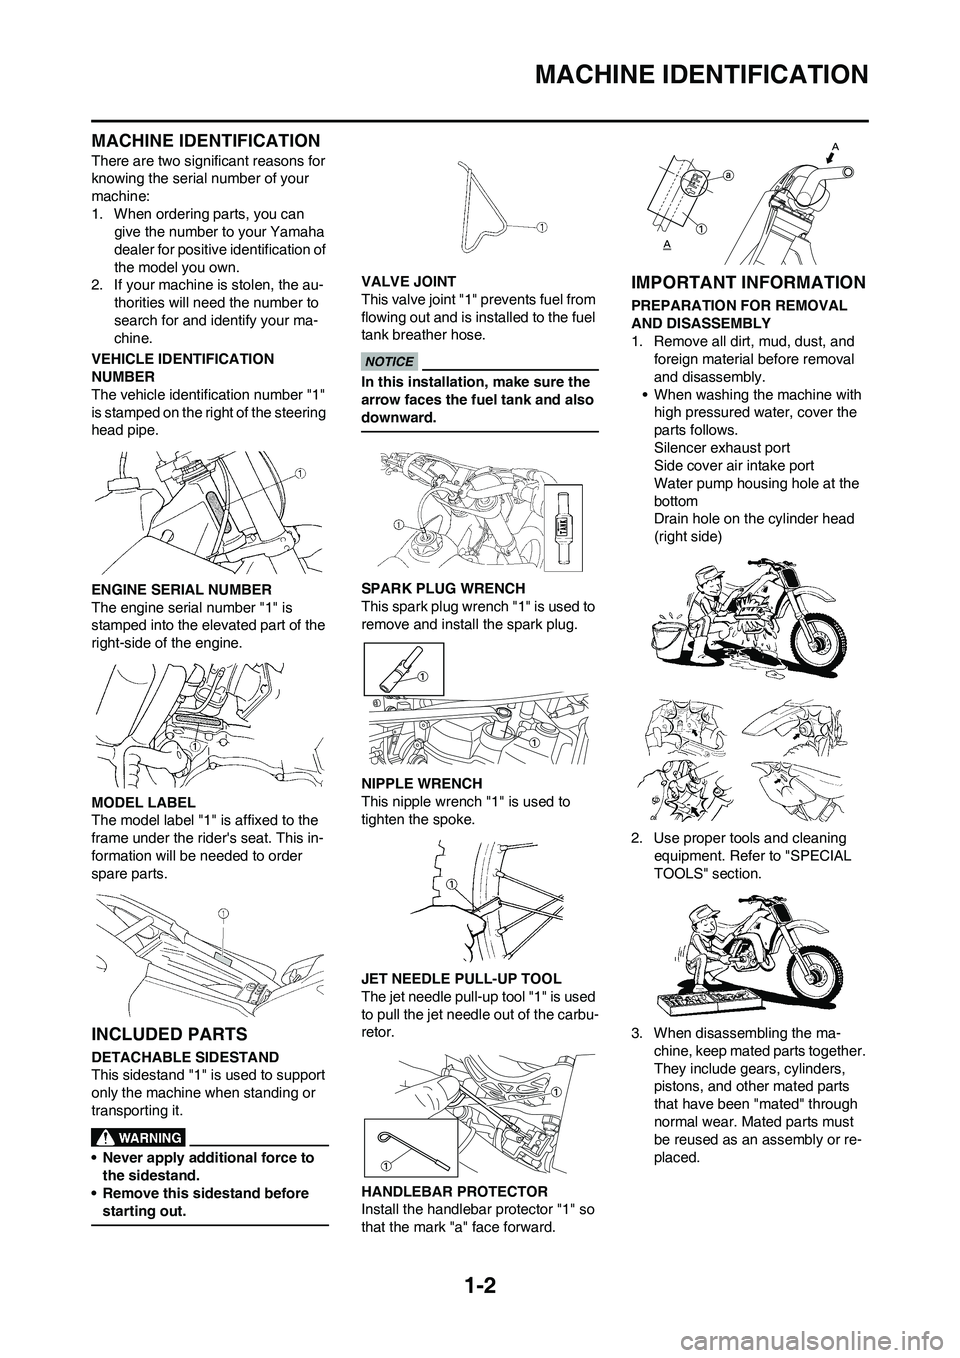 YAMAHA YZ450F 2009 User Guide 1-2
MACHINE IDENTIFICATION
MACHINE IDENTIFICATION
There are two significant reasons for 
knowing the serial number of your 
machine:
1. When ordering parts, you can 
give the number to your Yamaha 
de